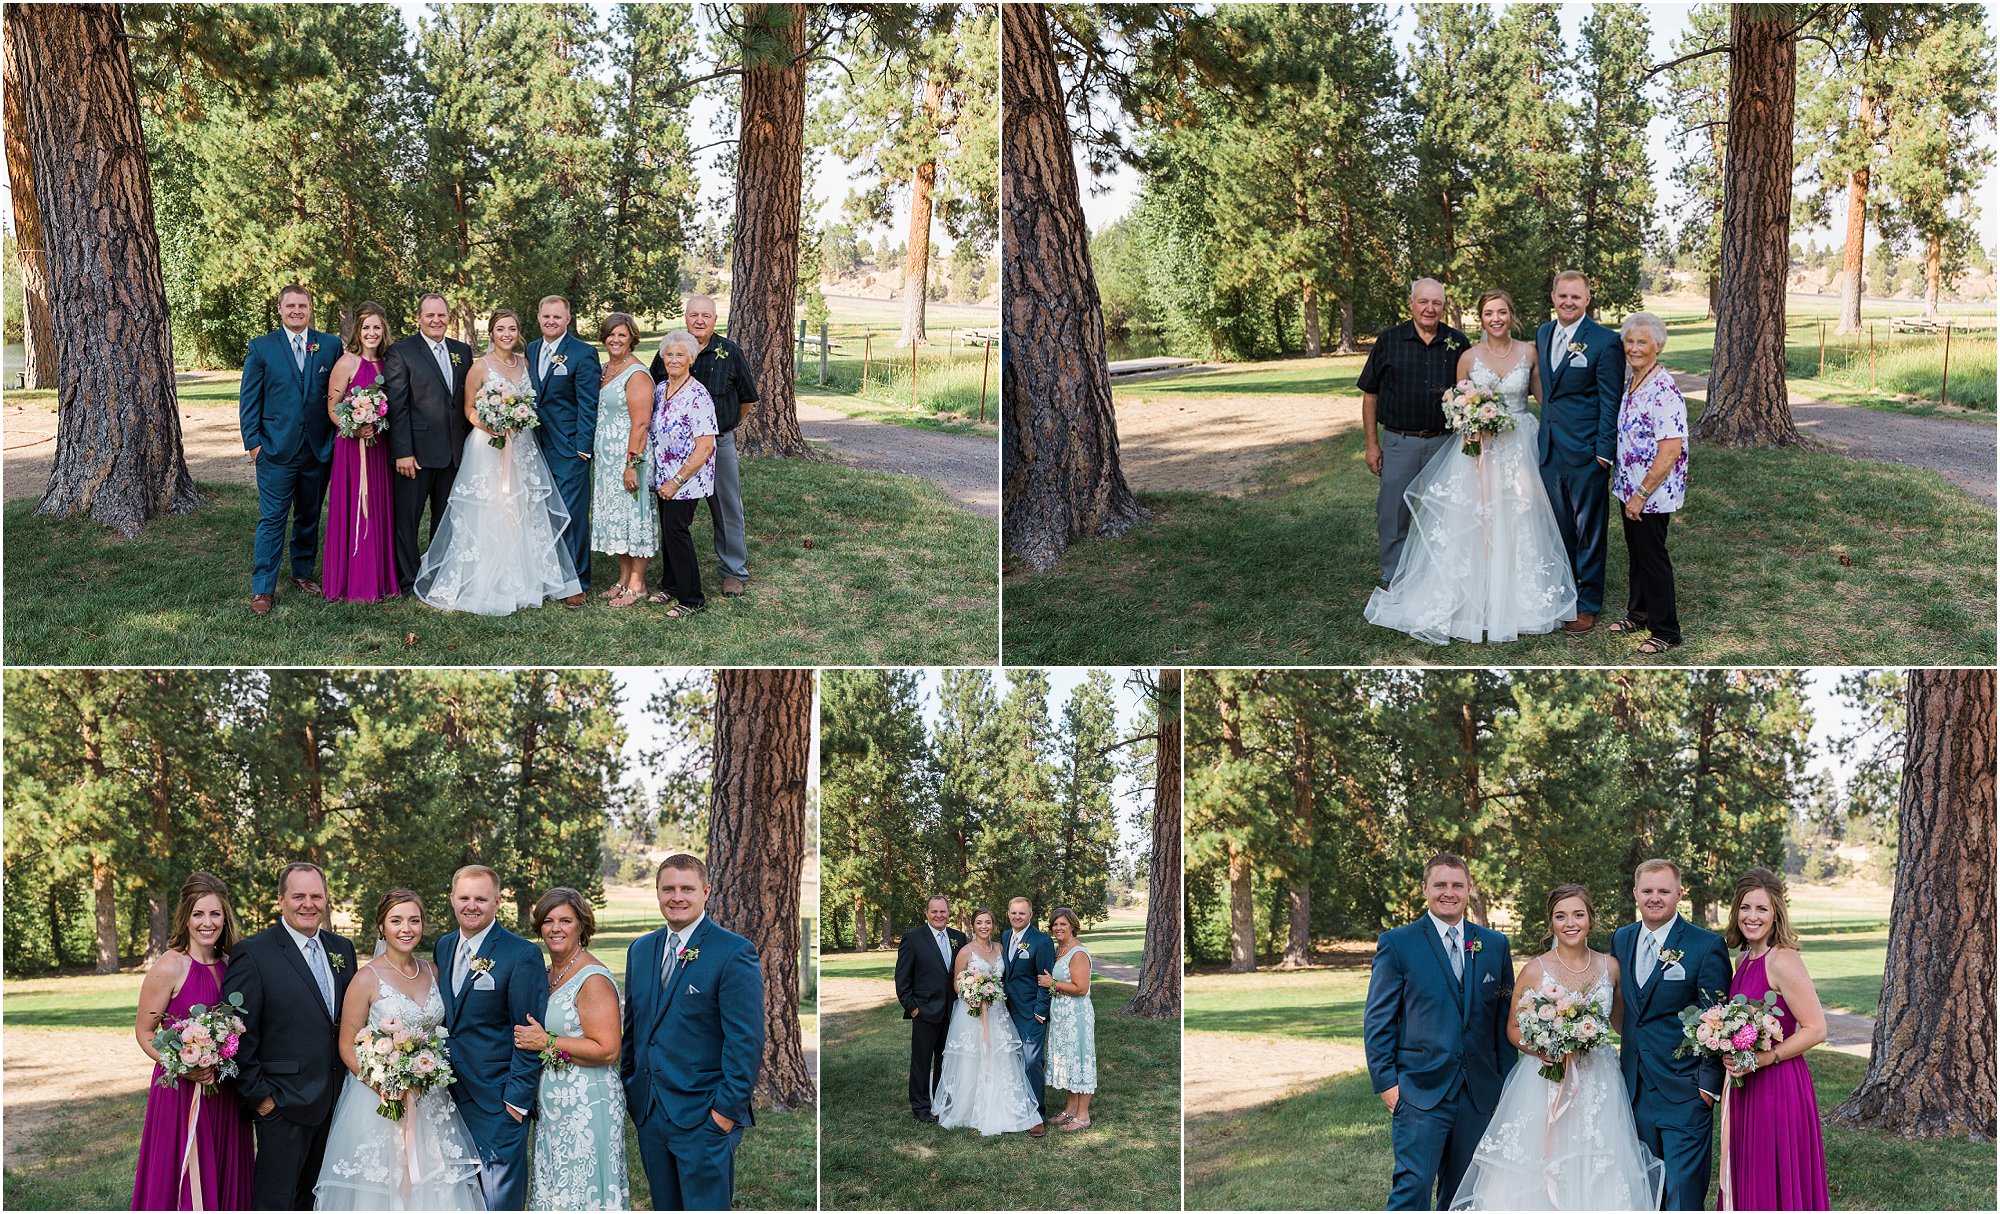 The bride and groom pose with their families for formal photos at their rustic outdoor Rock Springs Ranch wedding in Bend, OR. | Erica Swantek Photography